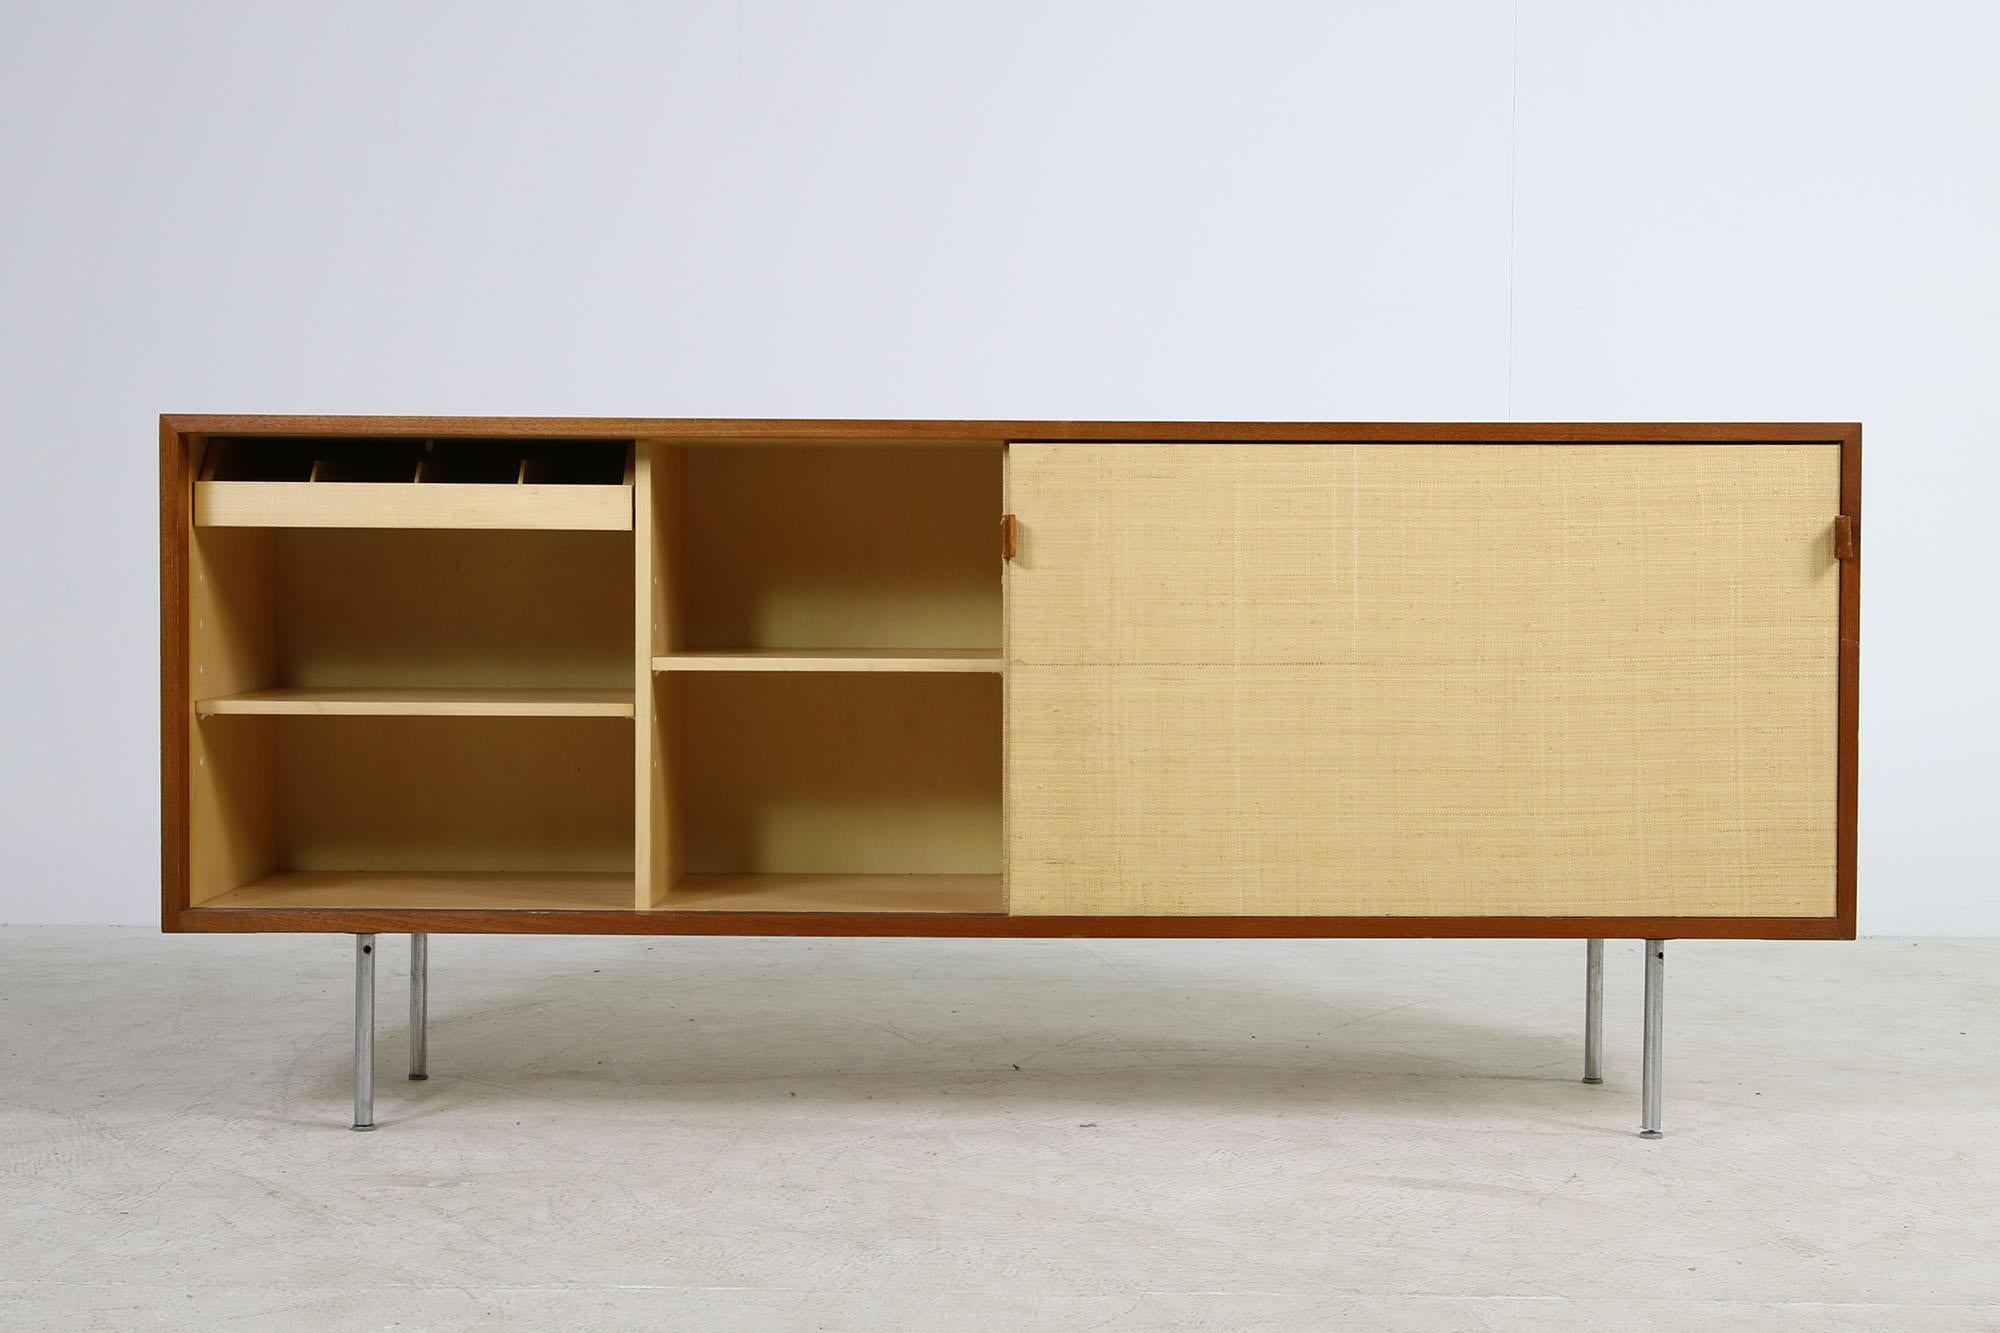 Beautiful and super rare vintage Florence Knoll Mod. 116 seagrass sideboard, made by Knoll International, made in Germany about 1949 in Teak wood and seagrass sliding doors - a very rare piece.

Also inside very clean, maple wood, shelves inside